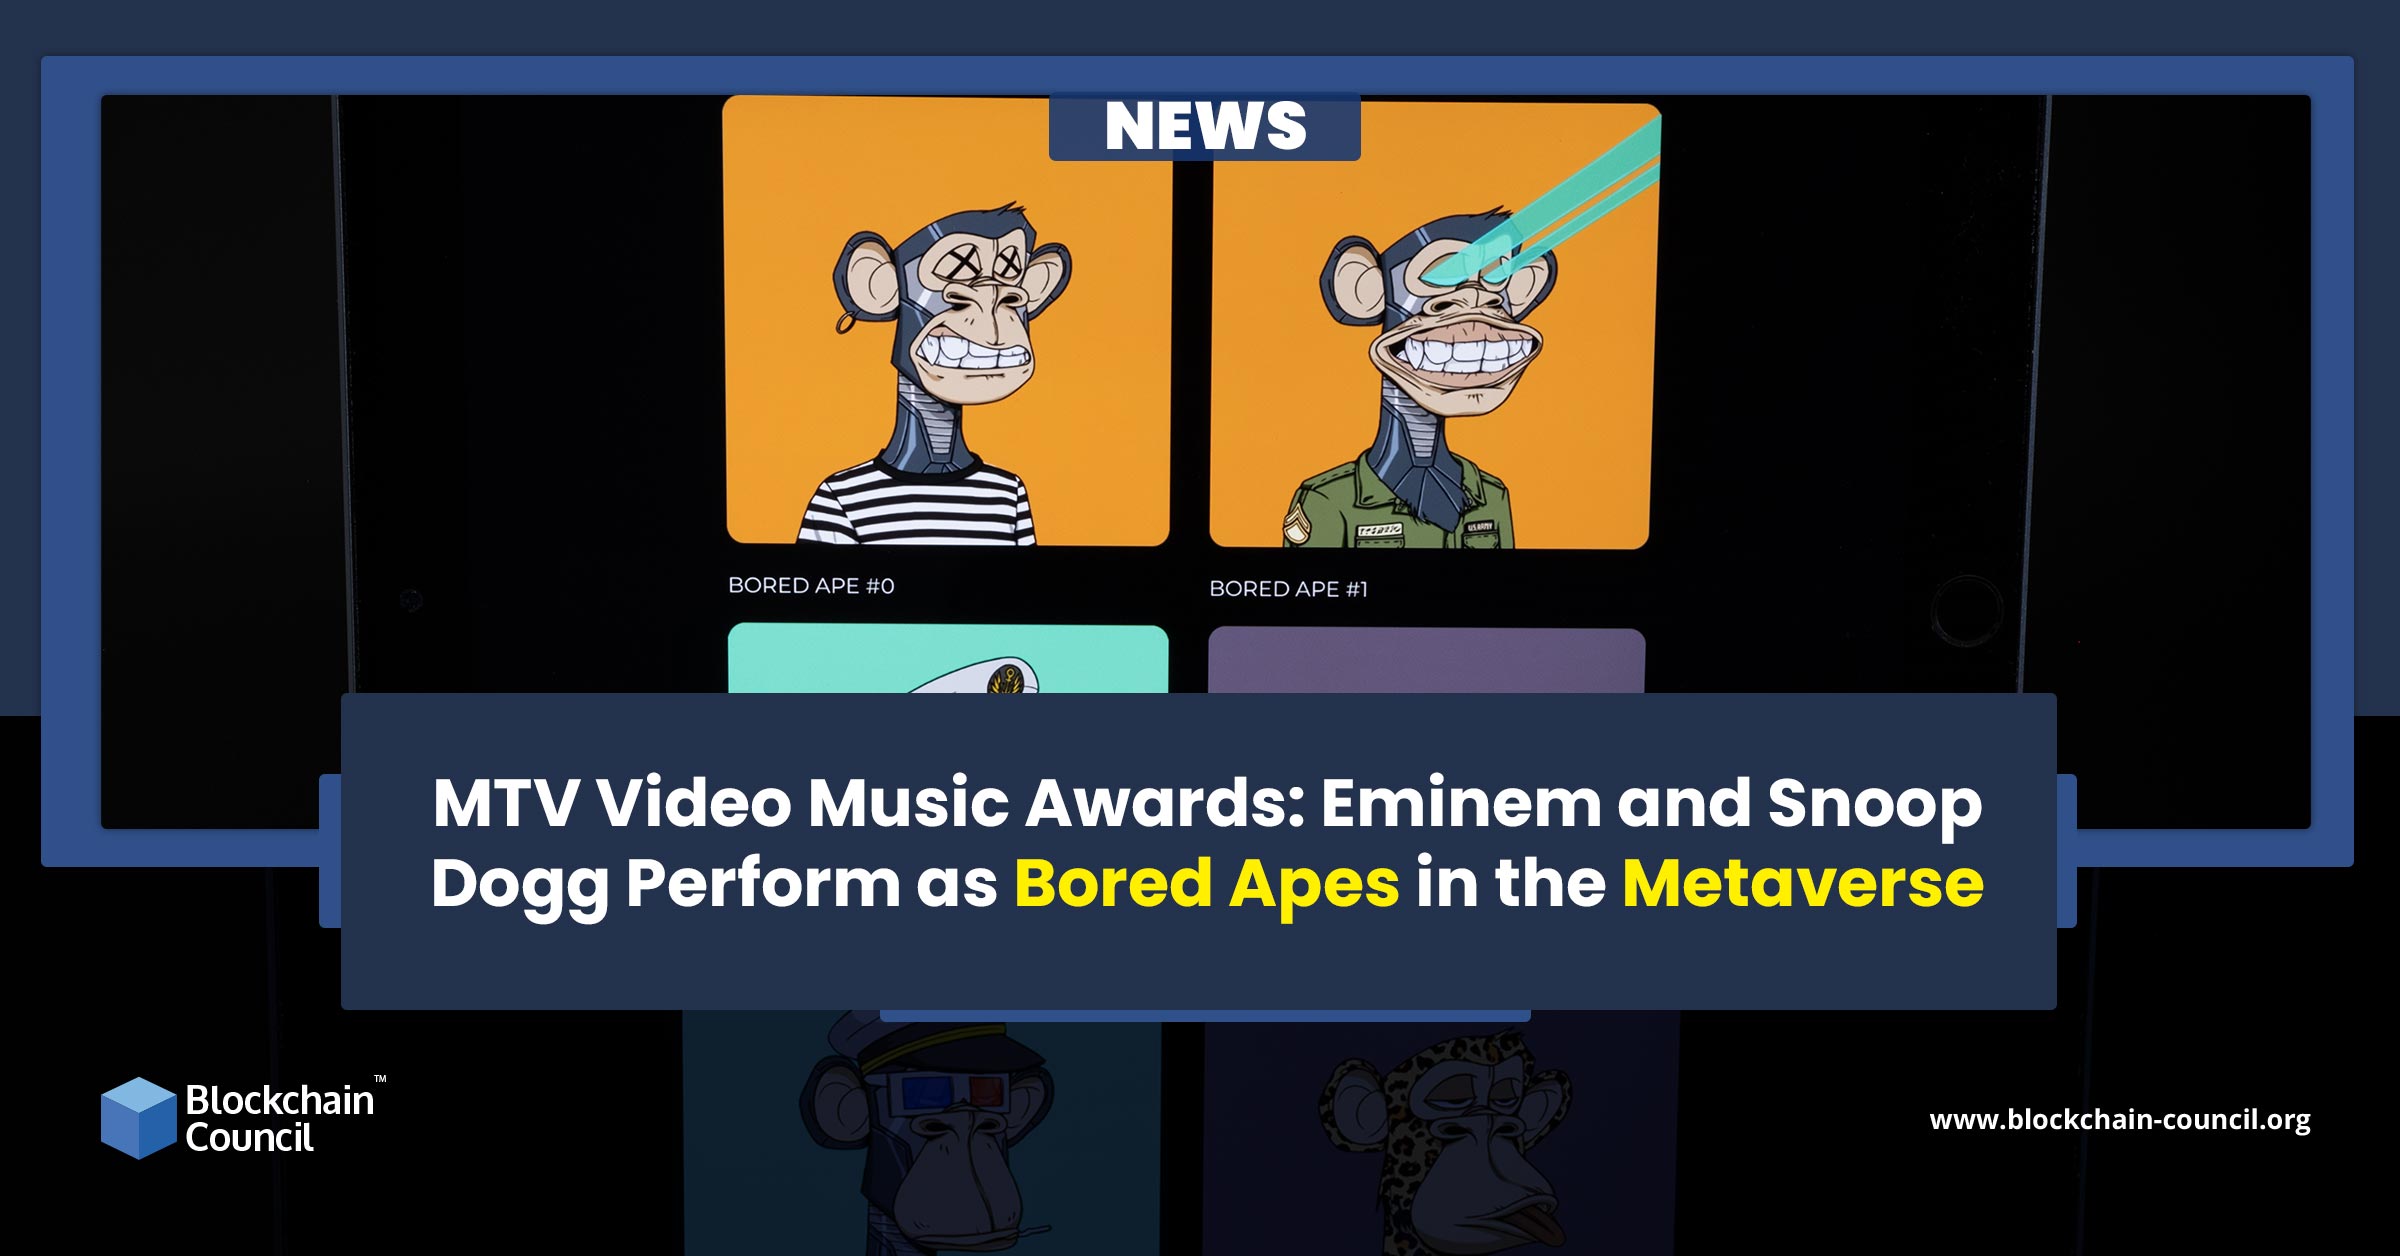 MTV Video Music Awards: Eminem and Snoop Dogg Perform as Bored Apes in the Metaverse